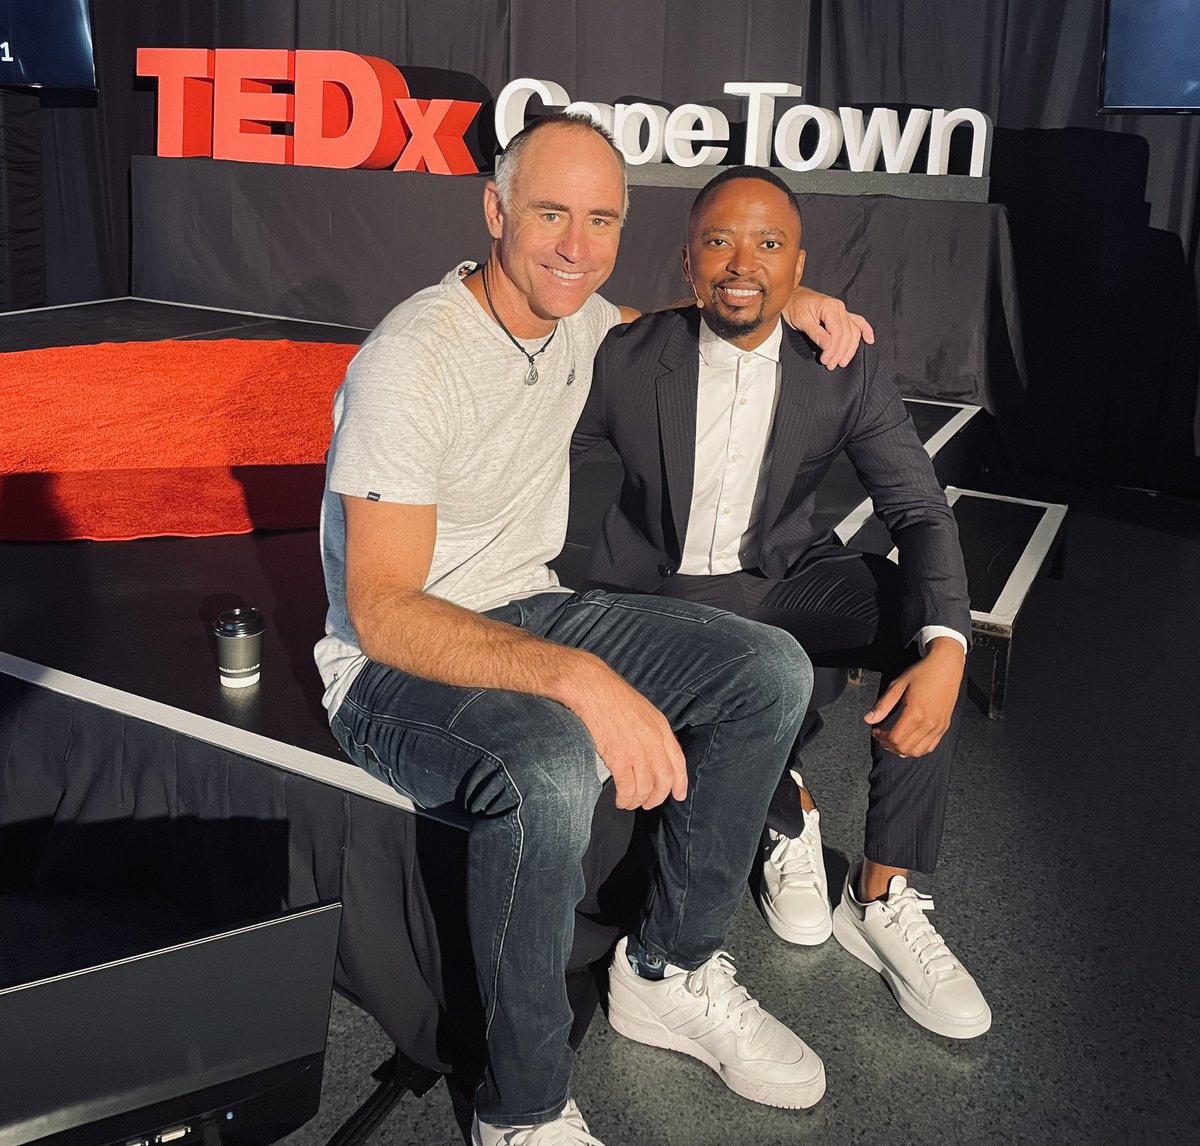 Met one of my heroes today. He’s coached some of the best teams in the world and he said he loves my work 🥲 @PaddyUpton1 @TEDx @tedxcapetown #PowerofX #TedXCT